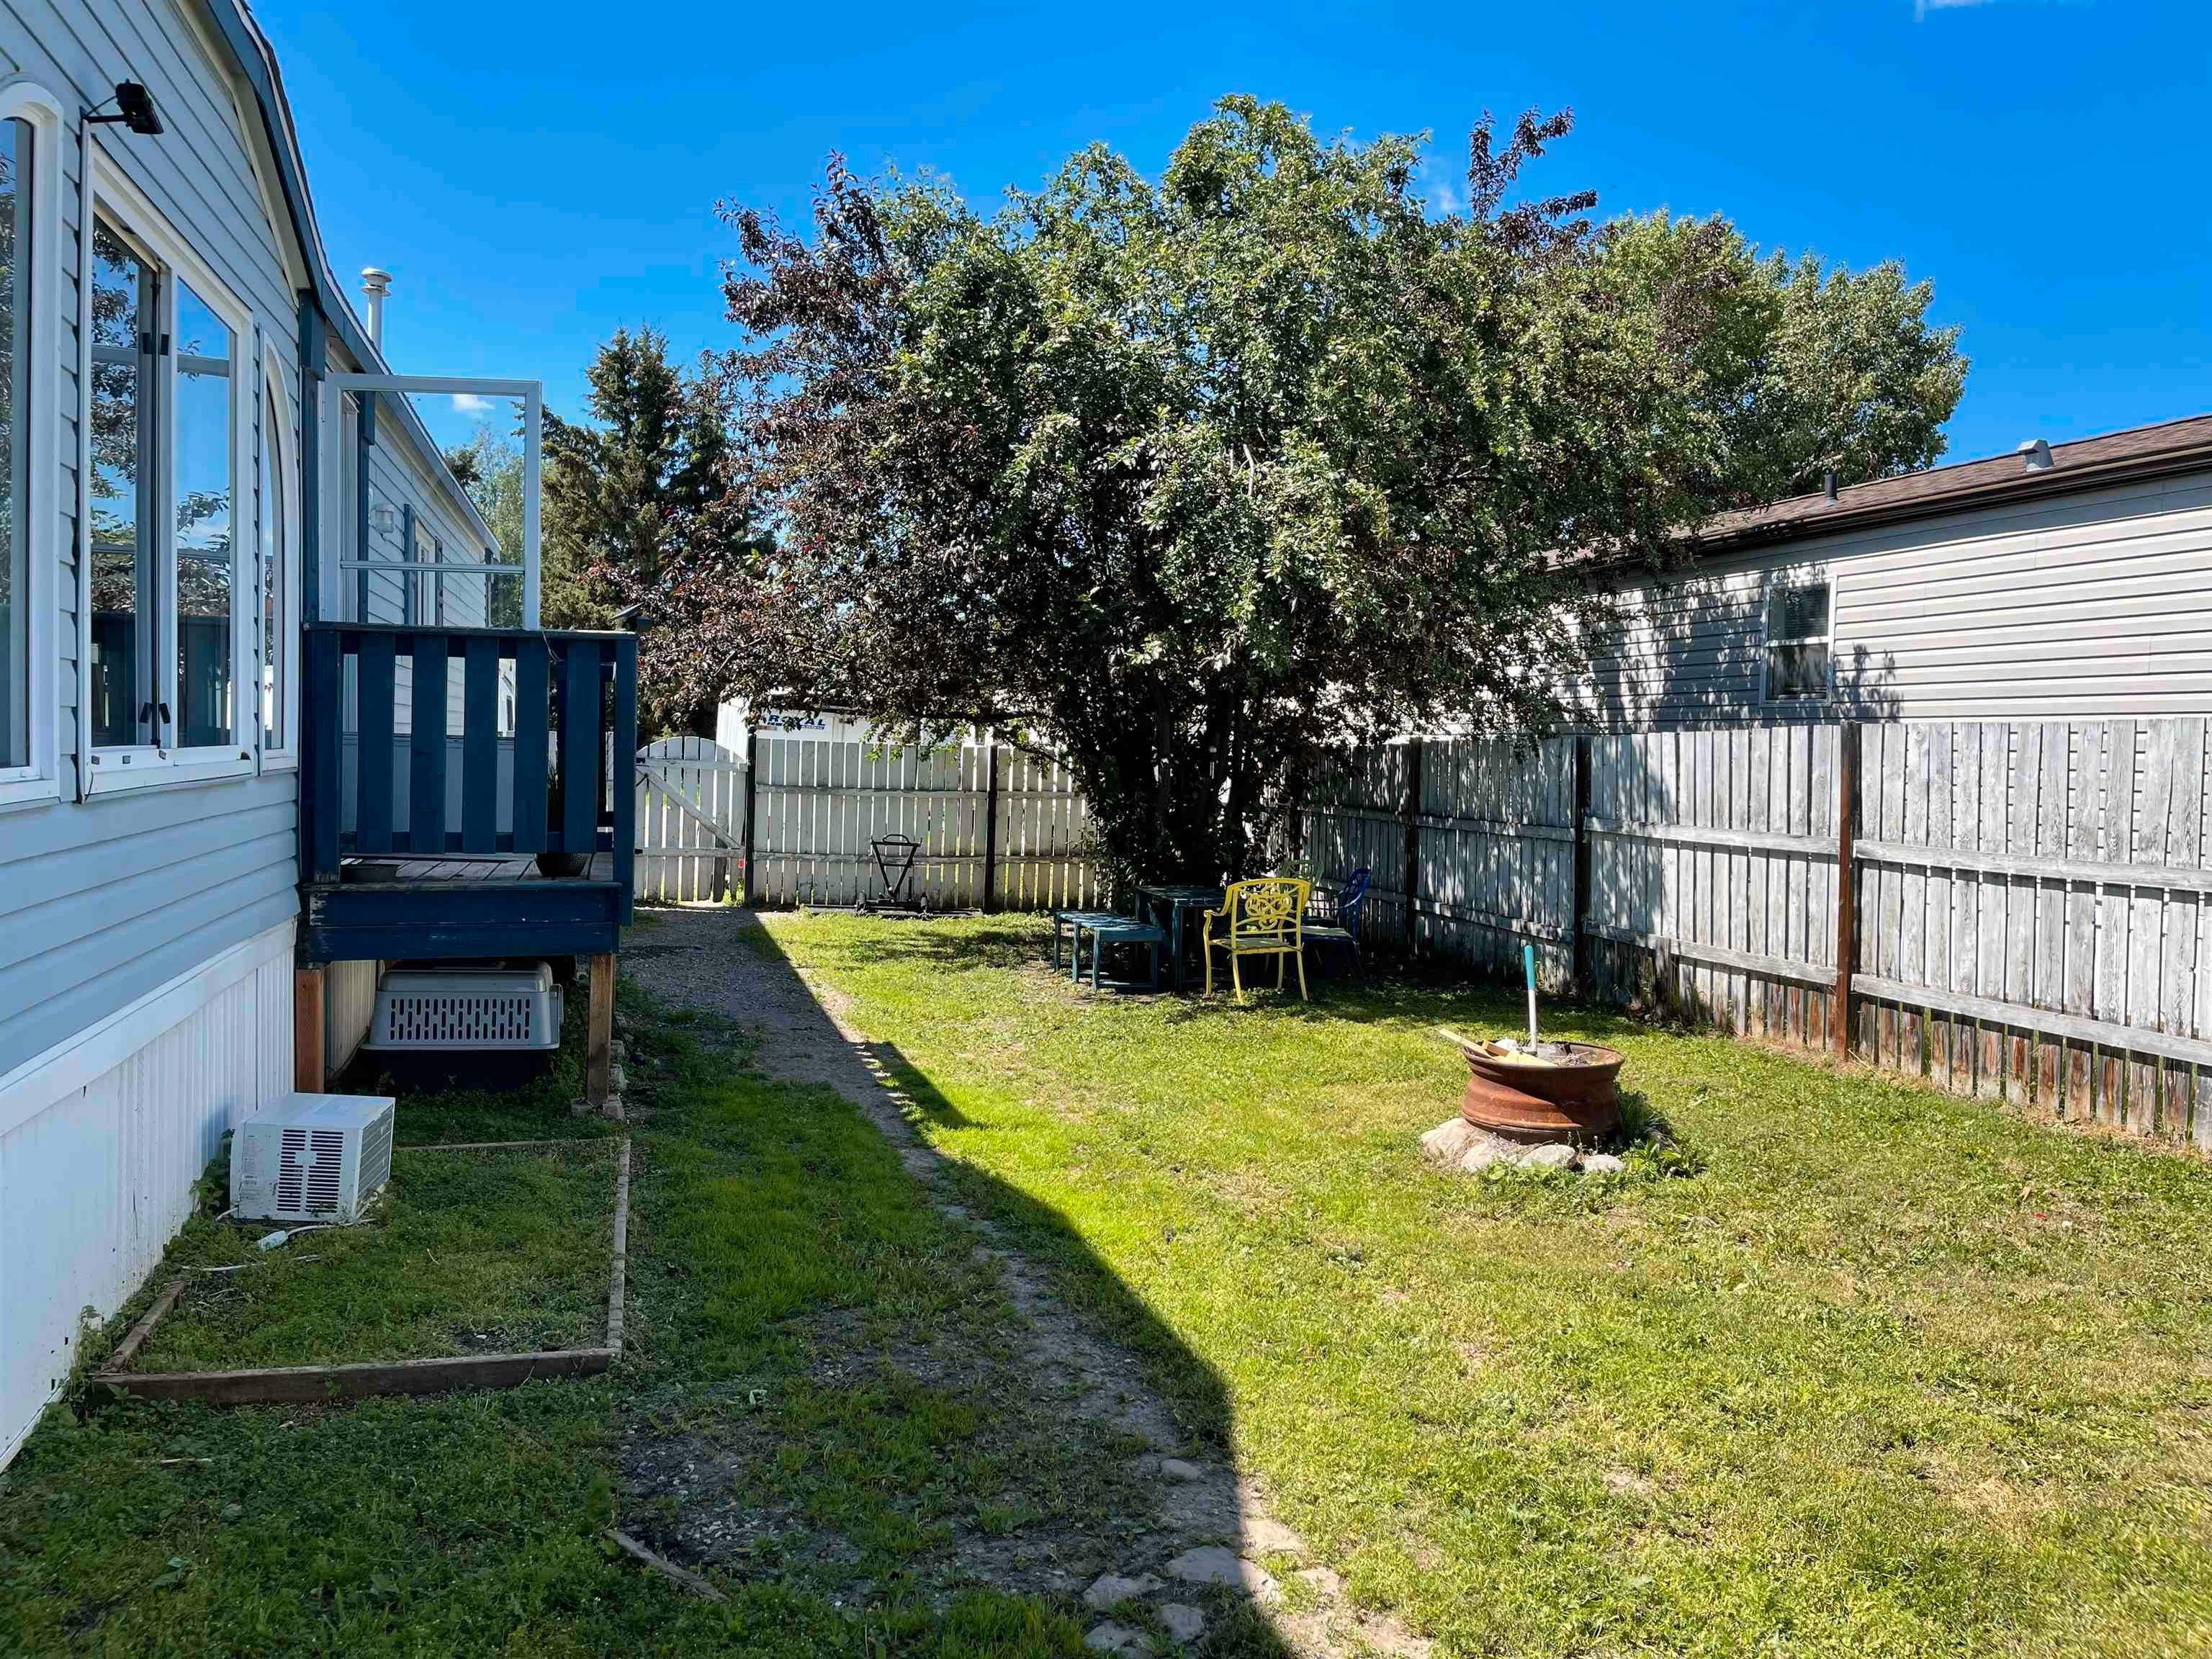 Photo 15: Photos: 10339 99 Street: Taylor Manufactured Home for sale (Fort St. John)  : MLS®# R2632849